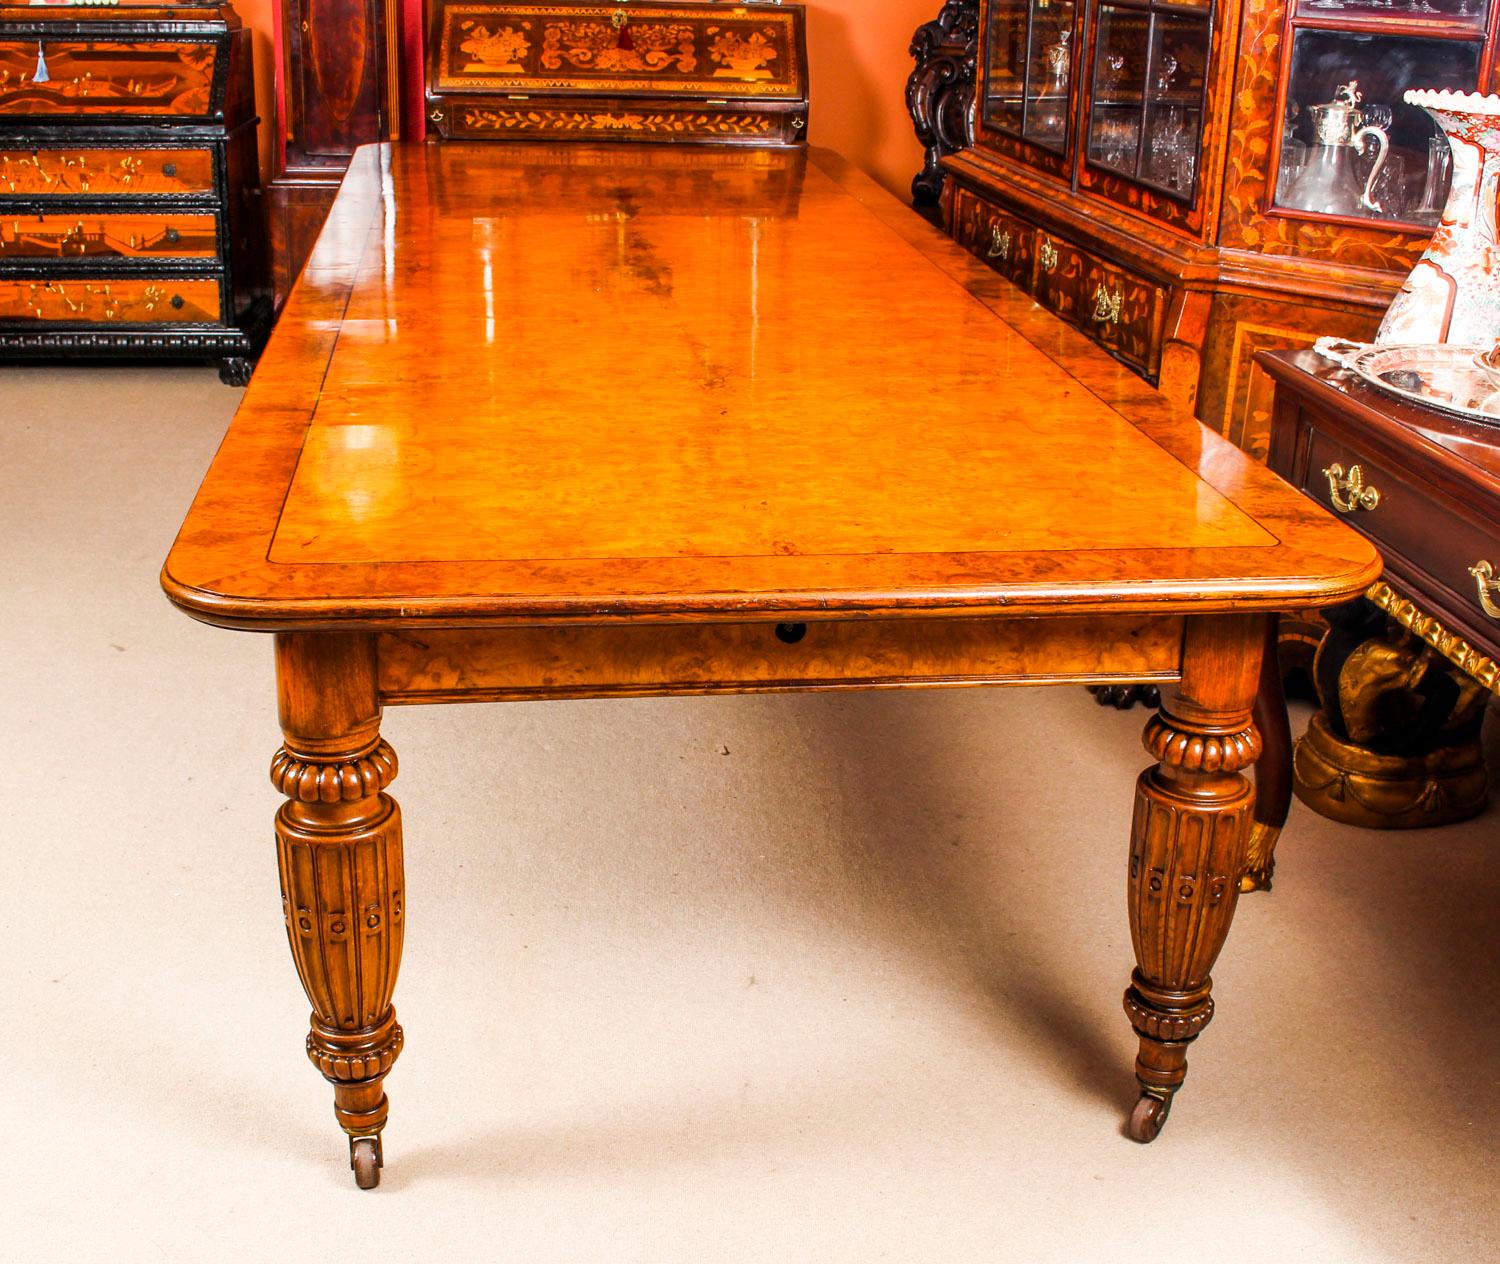 There is no mistaking the style and sophisticated design of this exquisite rare English antique Victorian pollard oak extending dining table, circa 1860 in date. This stunning dining table will stand out in your dining room and will definitely